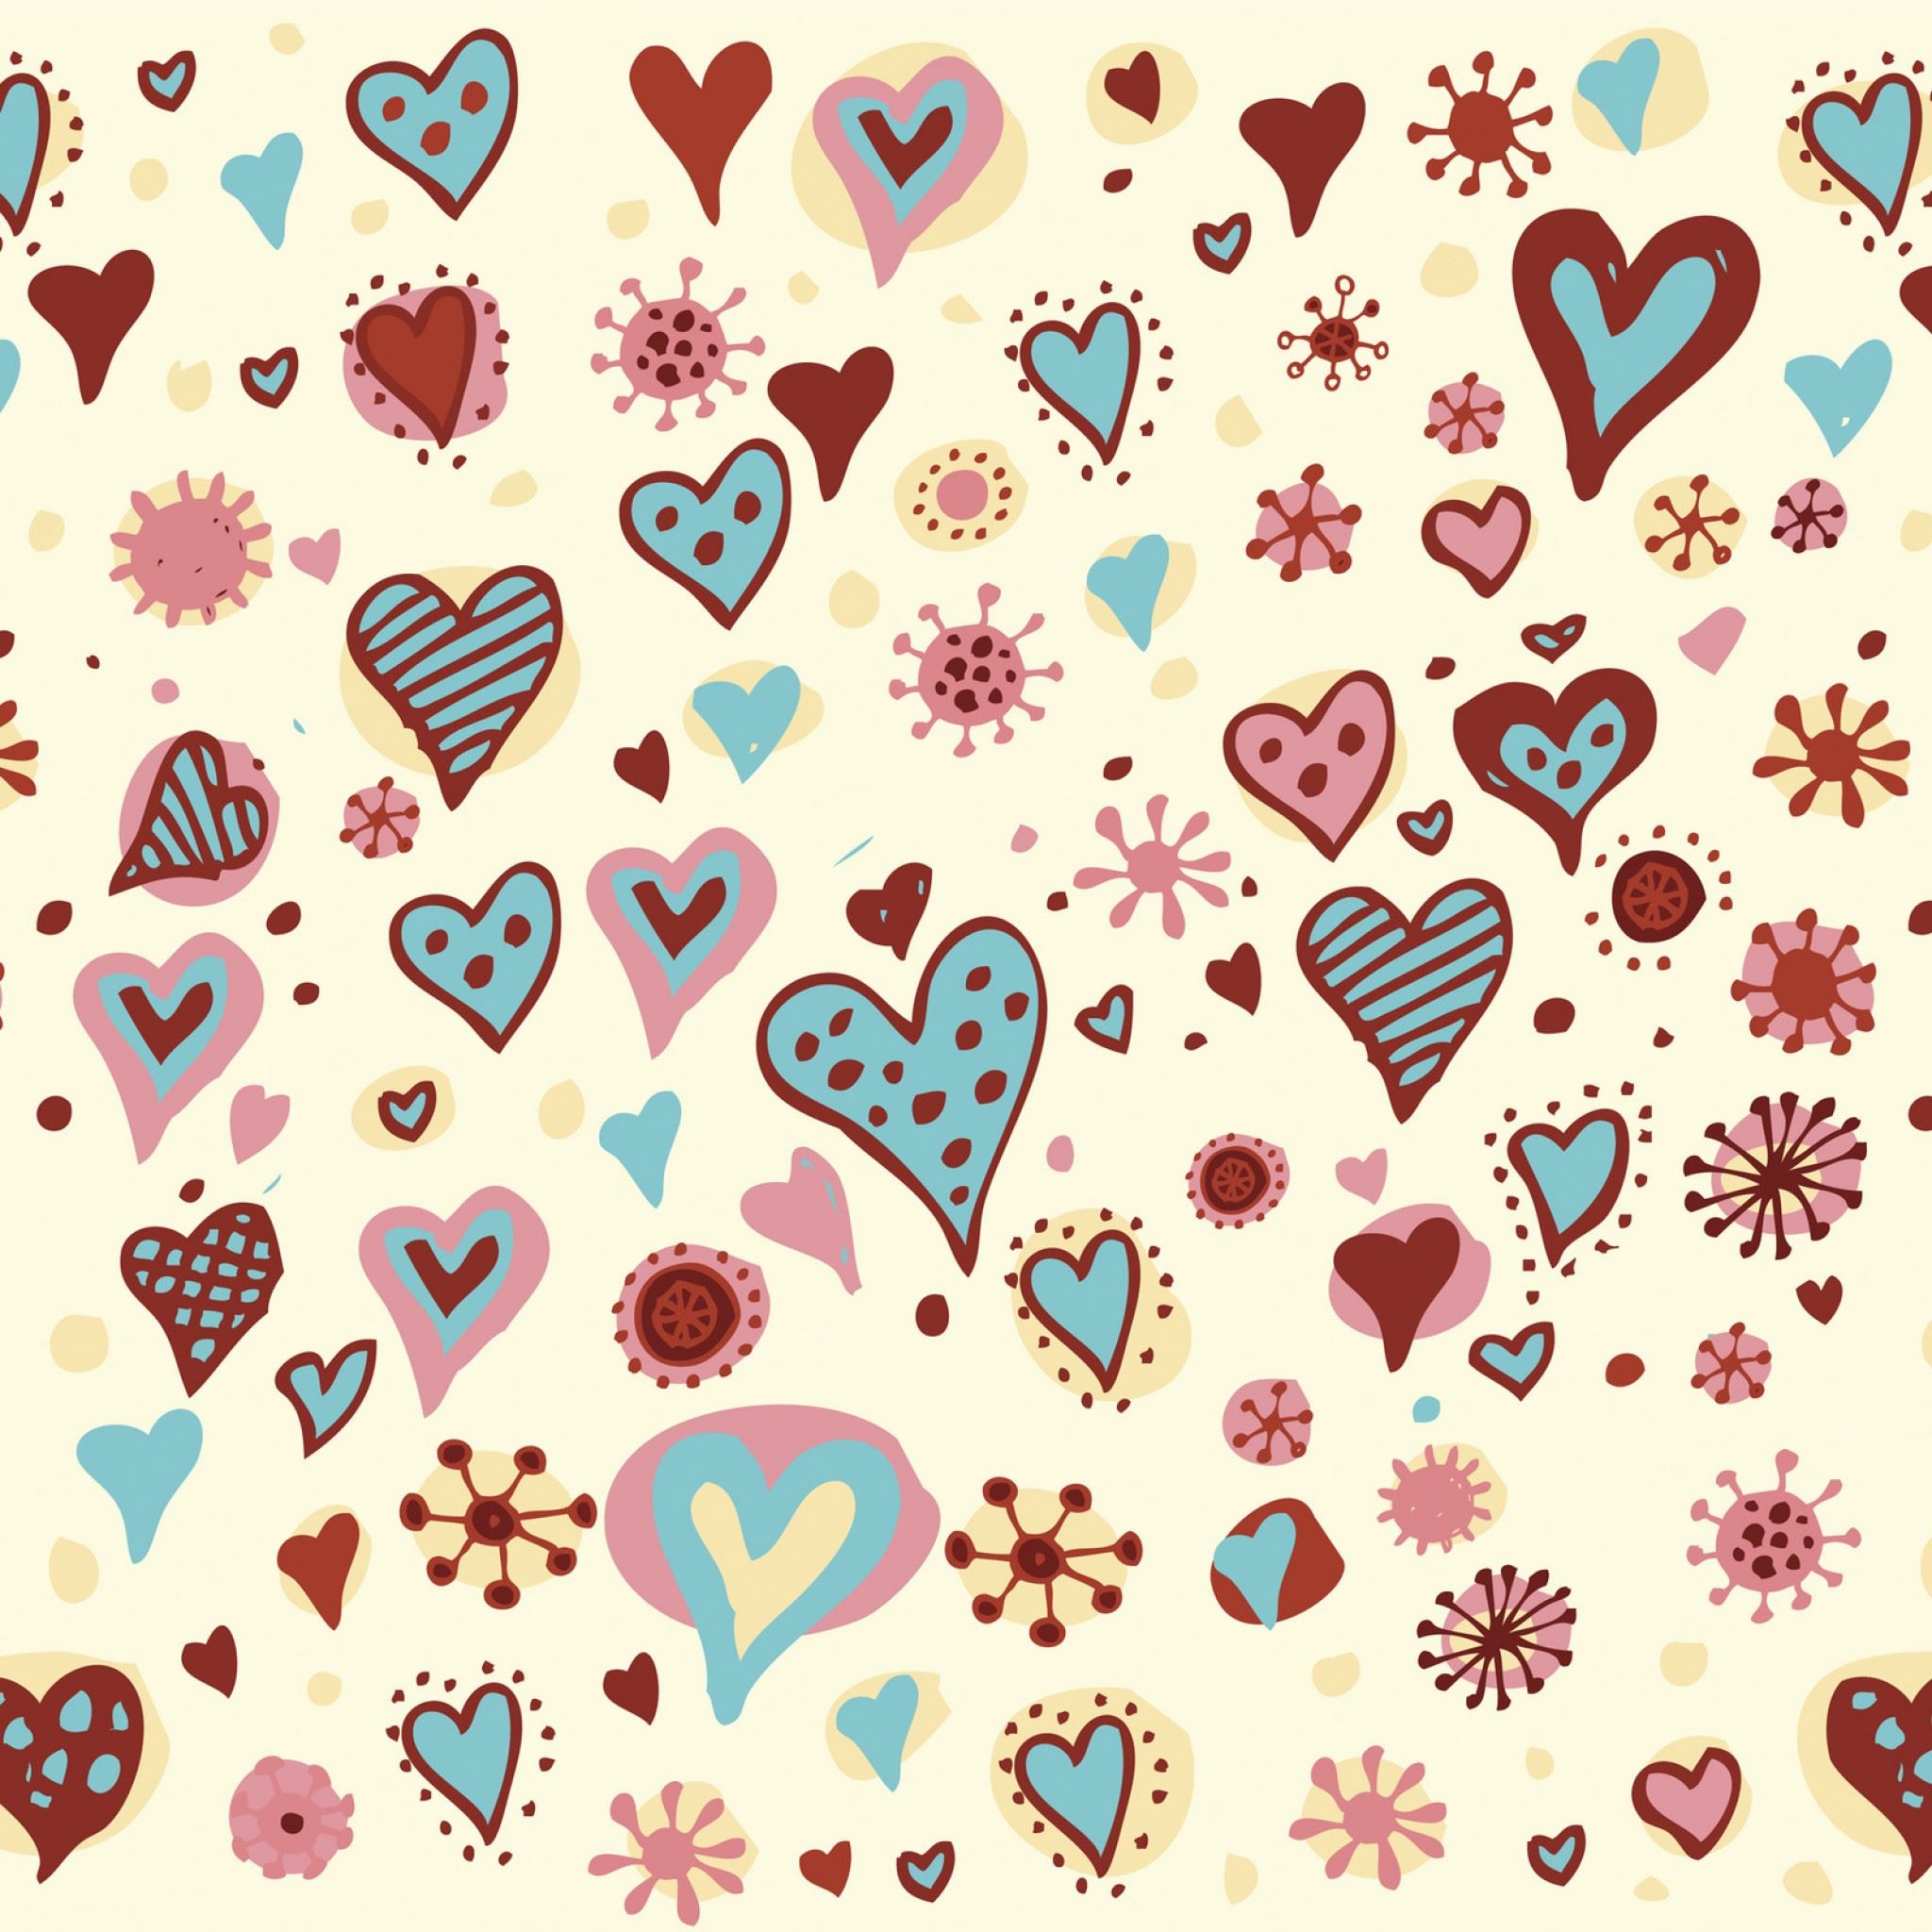 Valentines Day Hearts Textures iPad Air wallpaper 